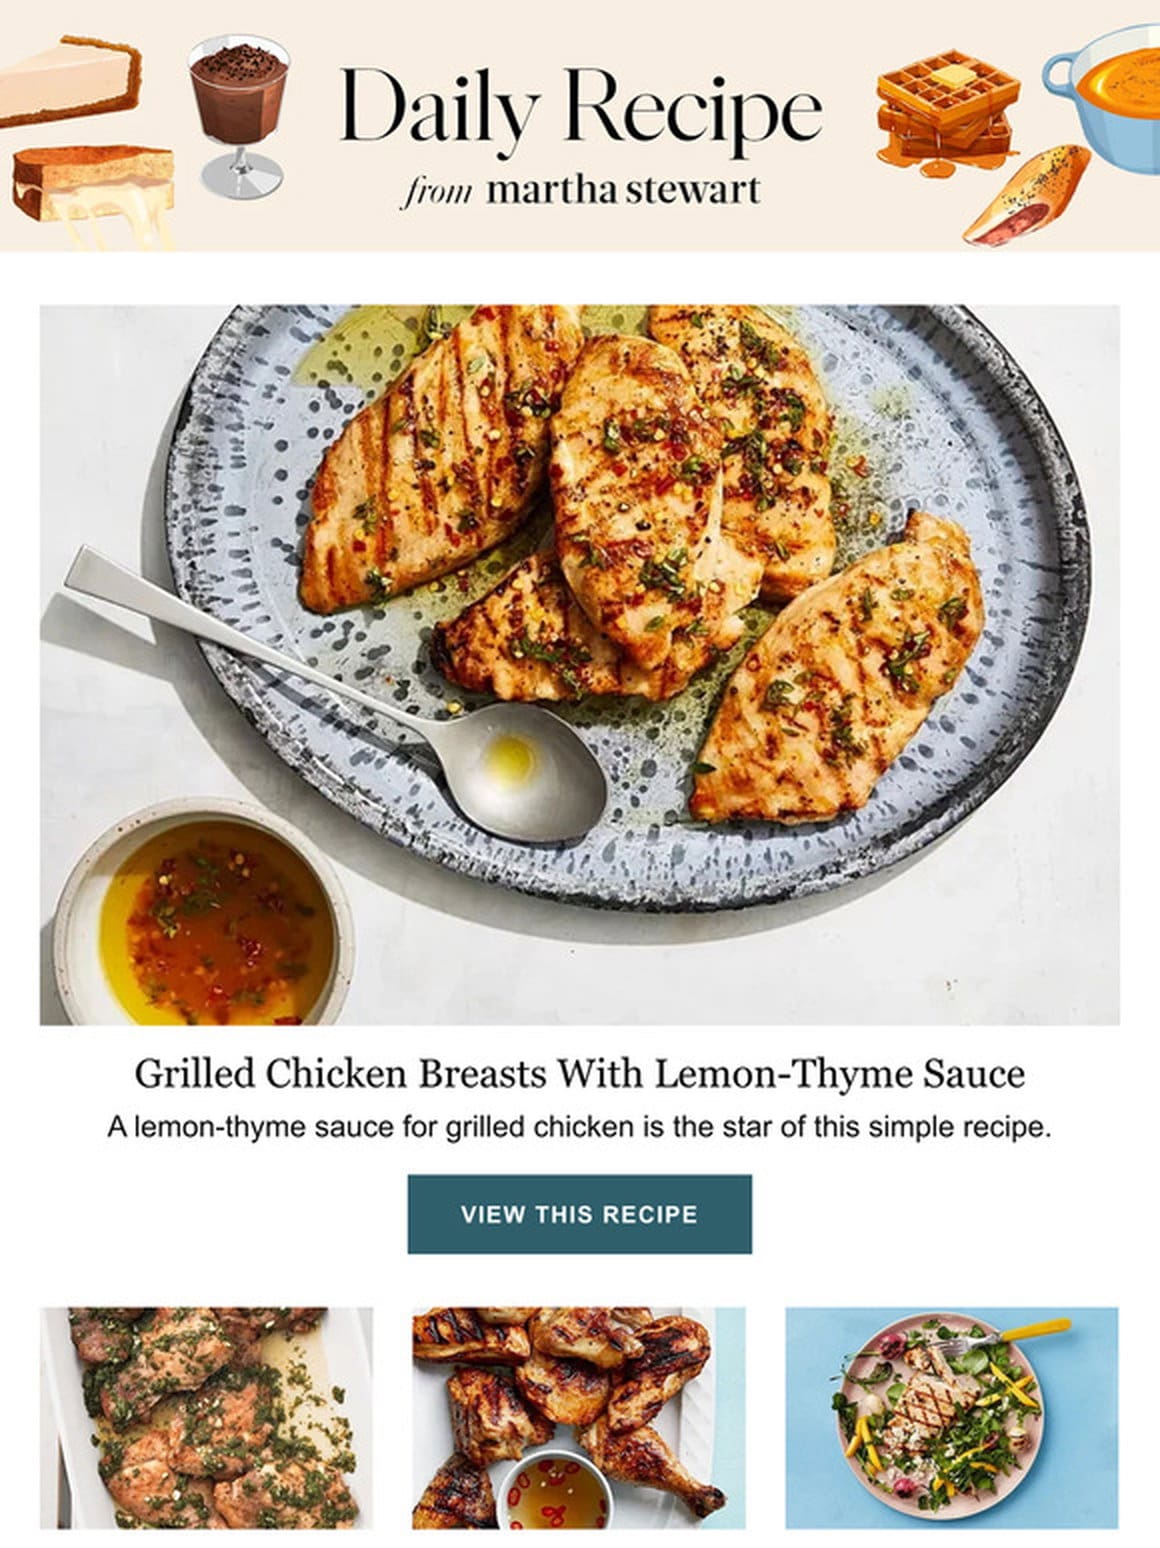 Grilled Chicken Breasts With Lemon-Thyme Sauce